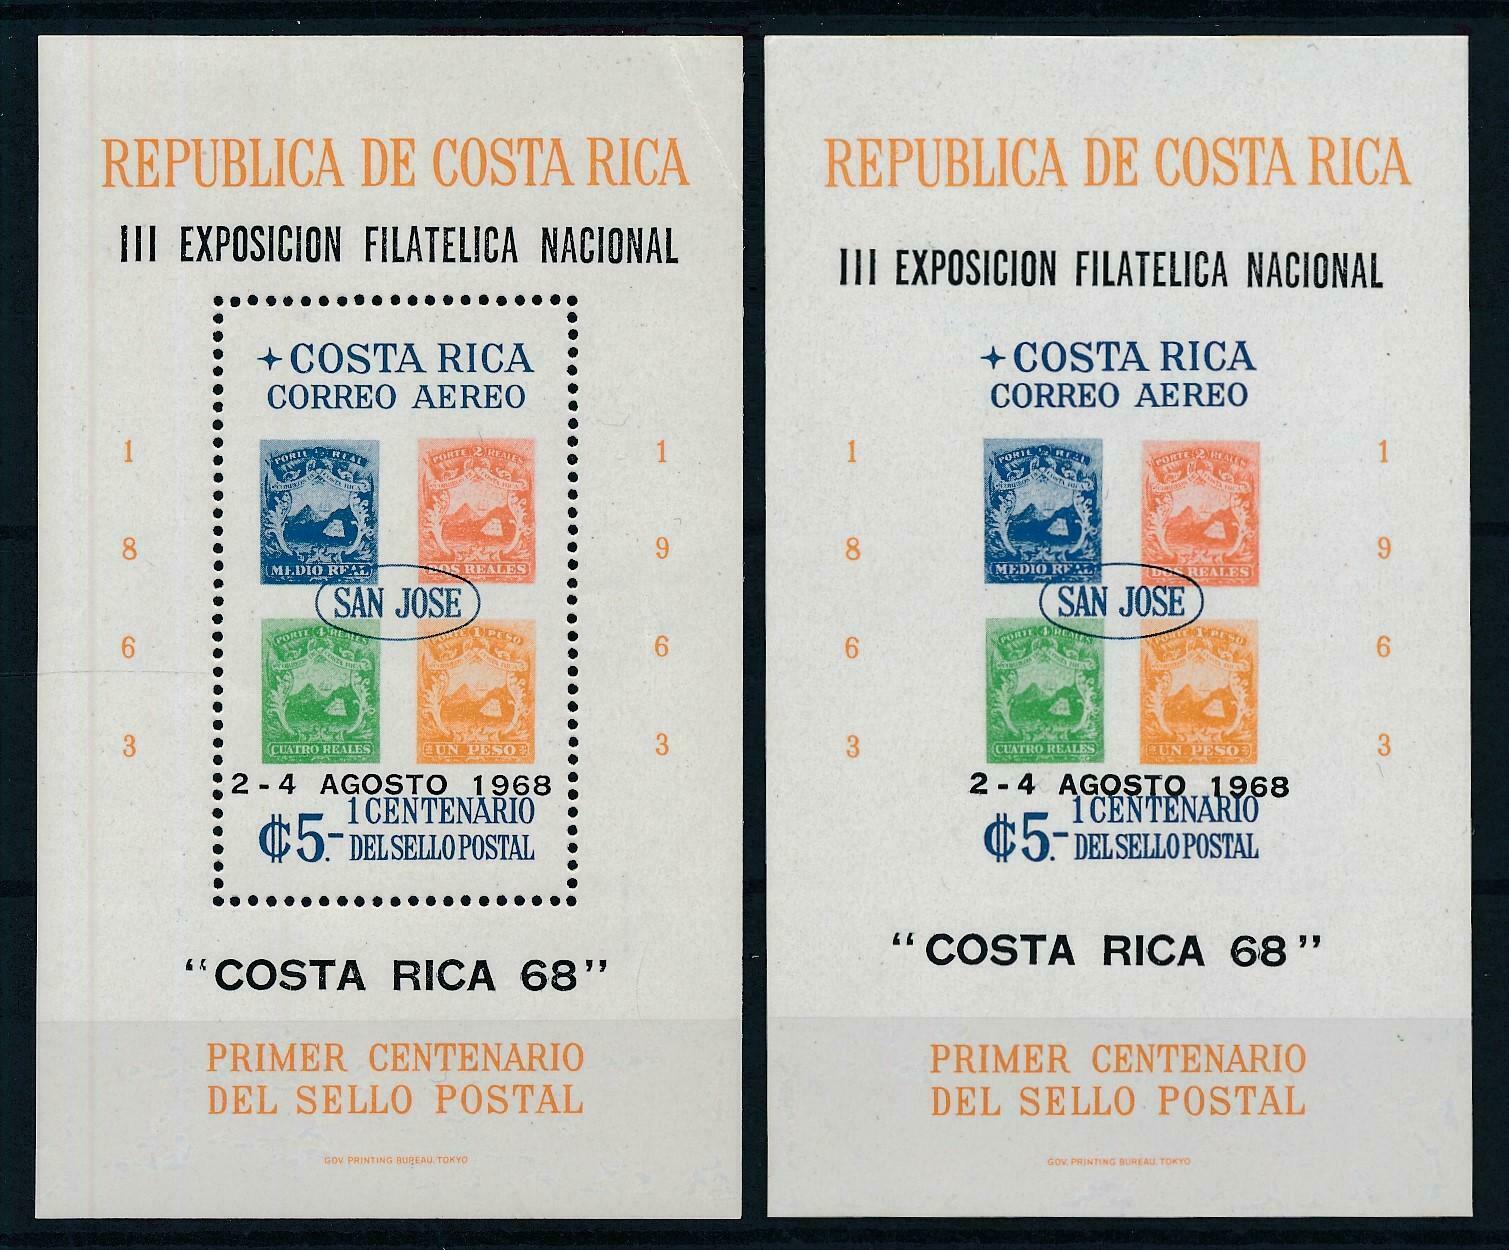 [104309] Costa Rica 1968 Philatelic Expo Ovp Stamps Perf. & Imperf. Sheets Mnh